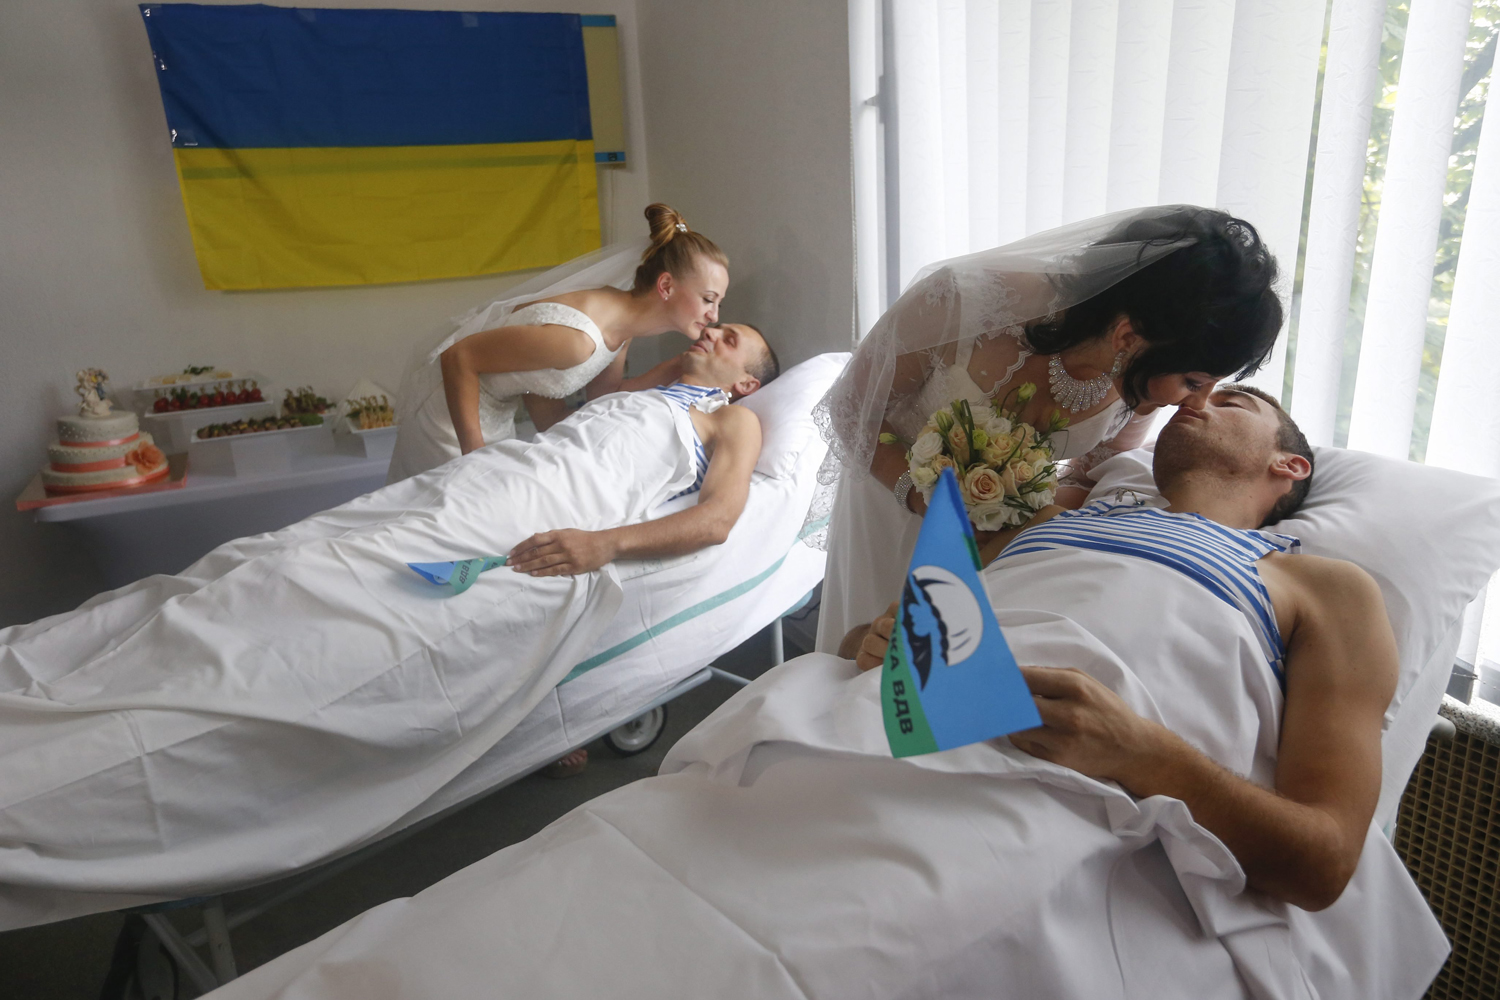 Wounded members of the Ukrainian force kiss their brides in hospital beds